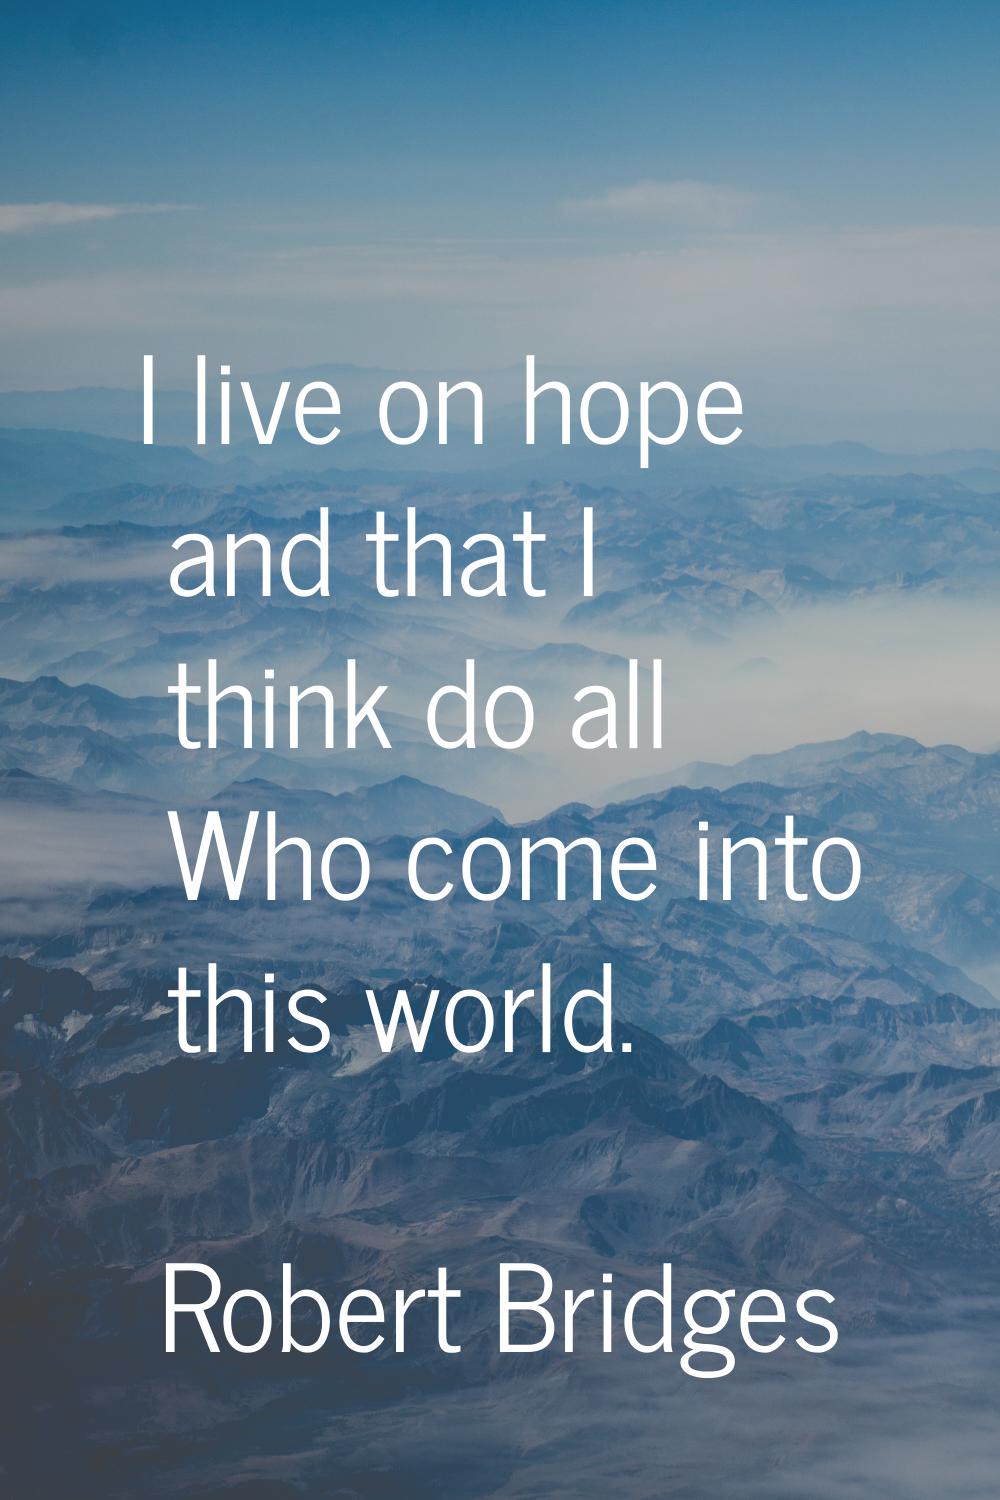 I live on hope and that I think do all Who come into this world.